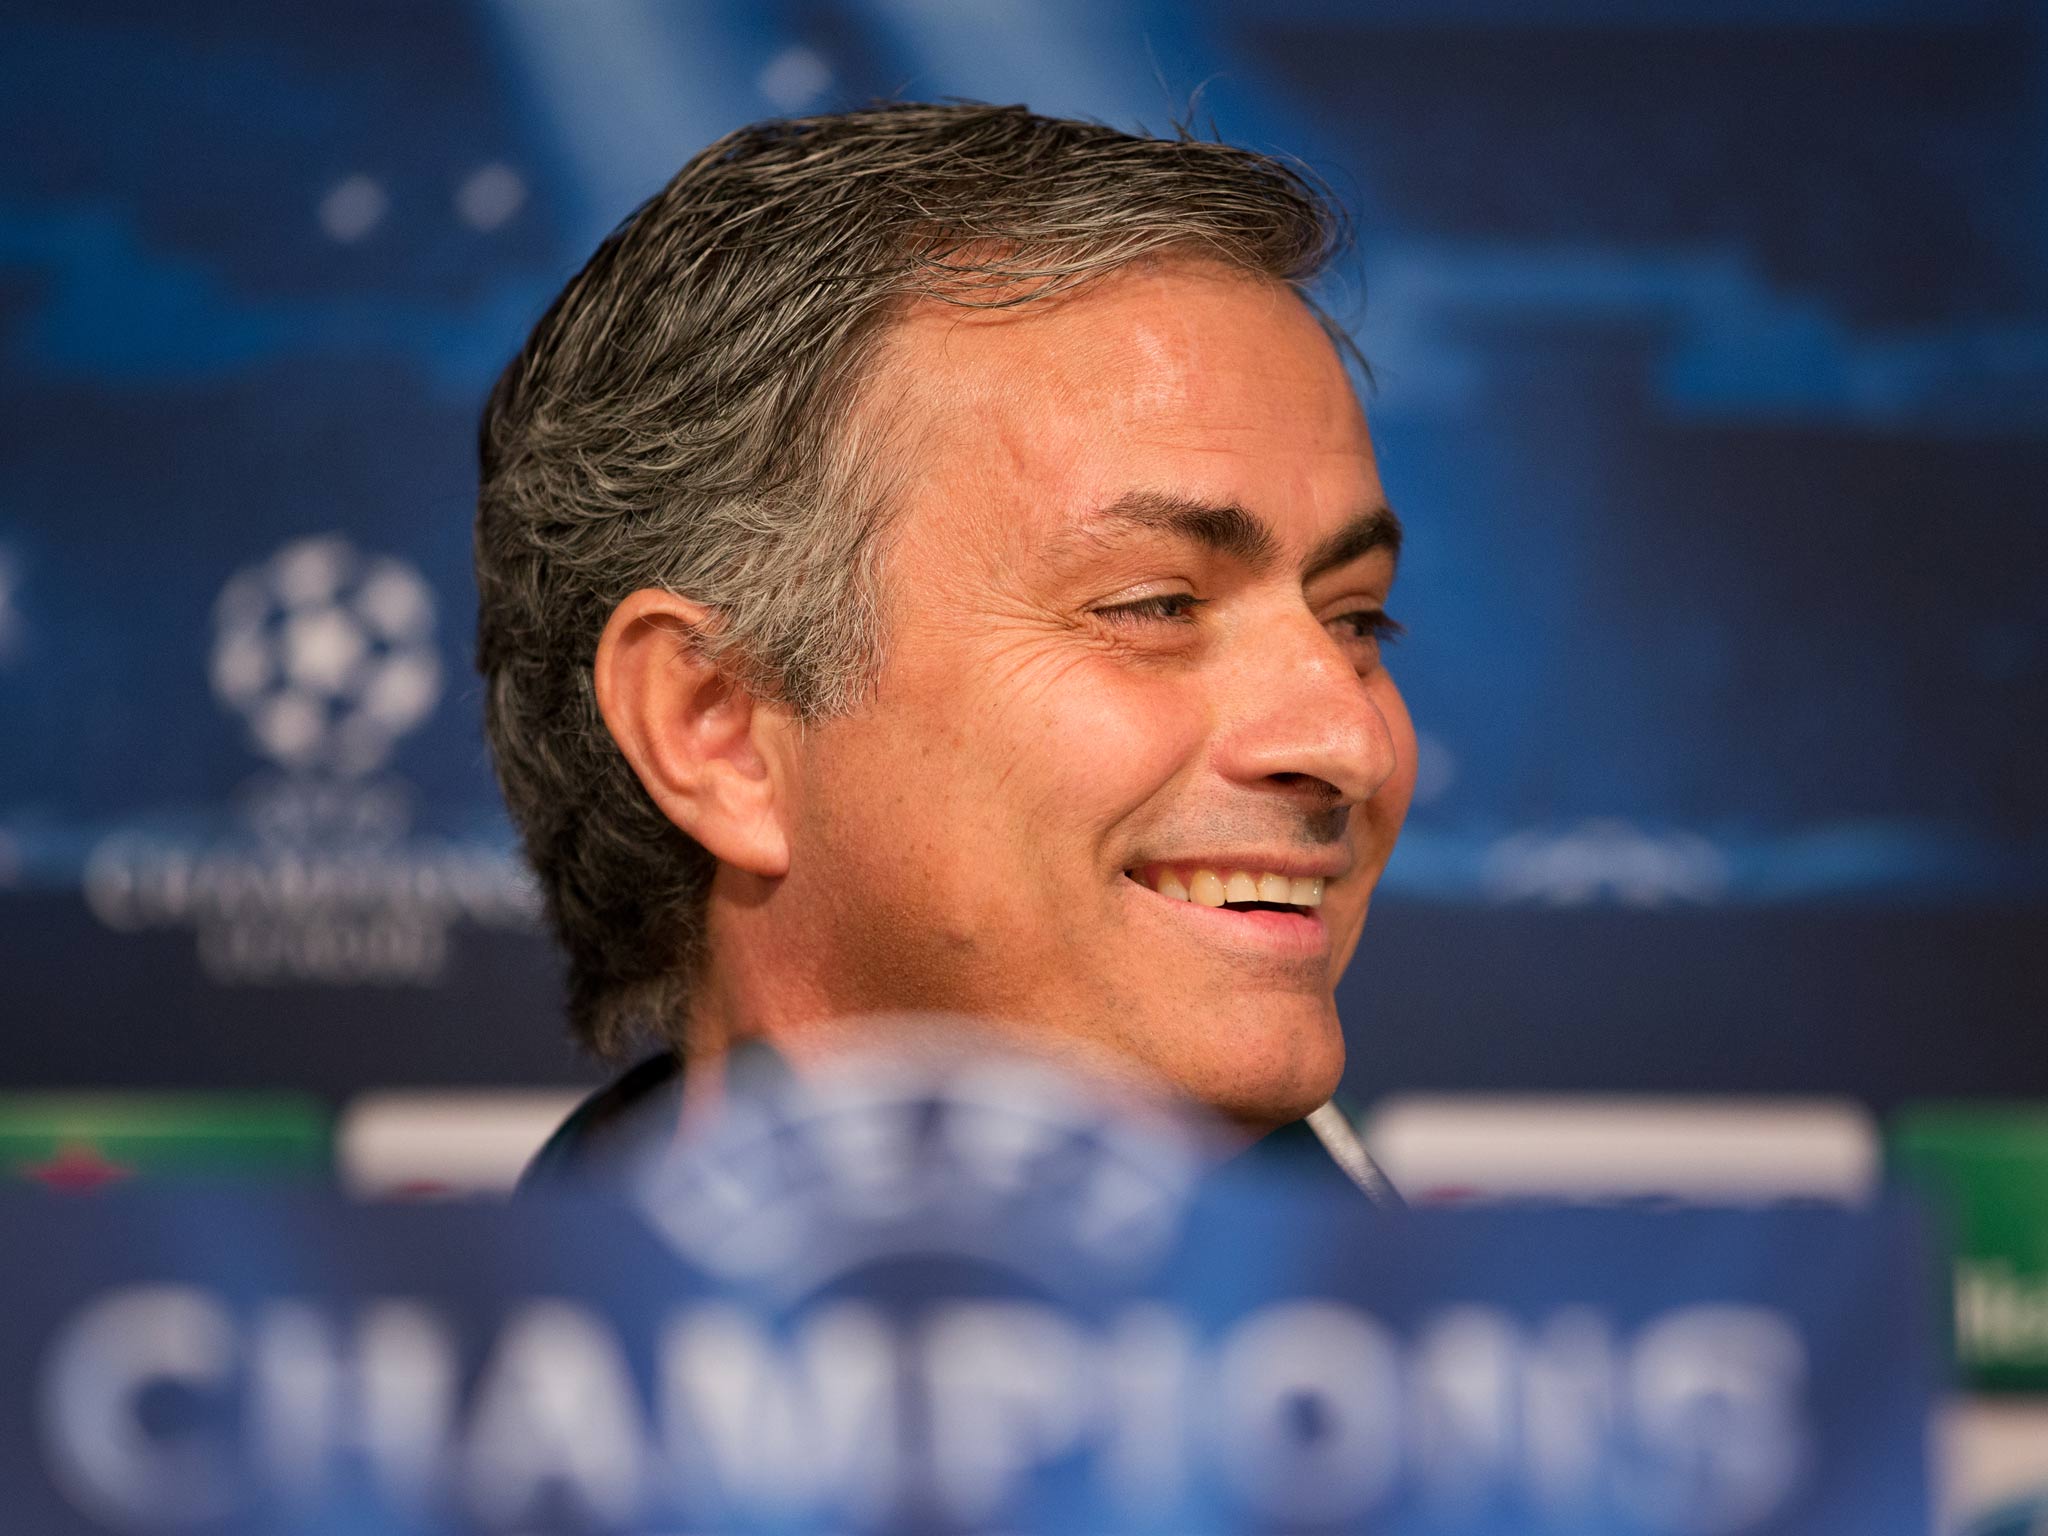 Jose Mourinho talks to the media ahead of Real Madrid's Champions League tie against Manchester United